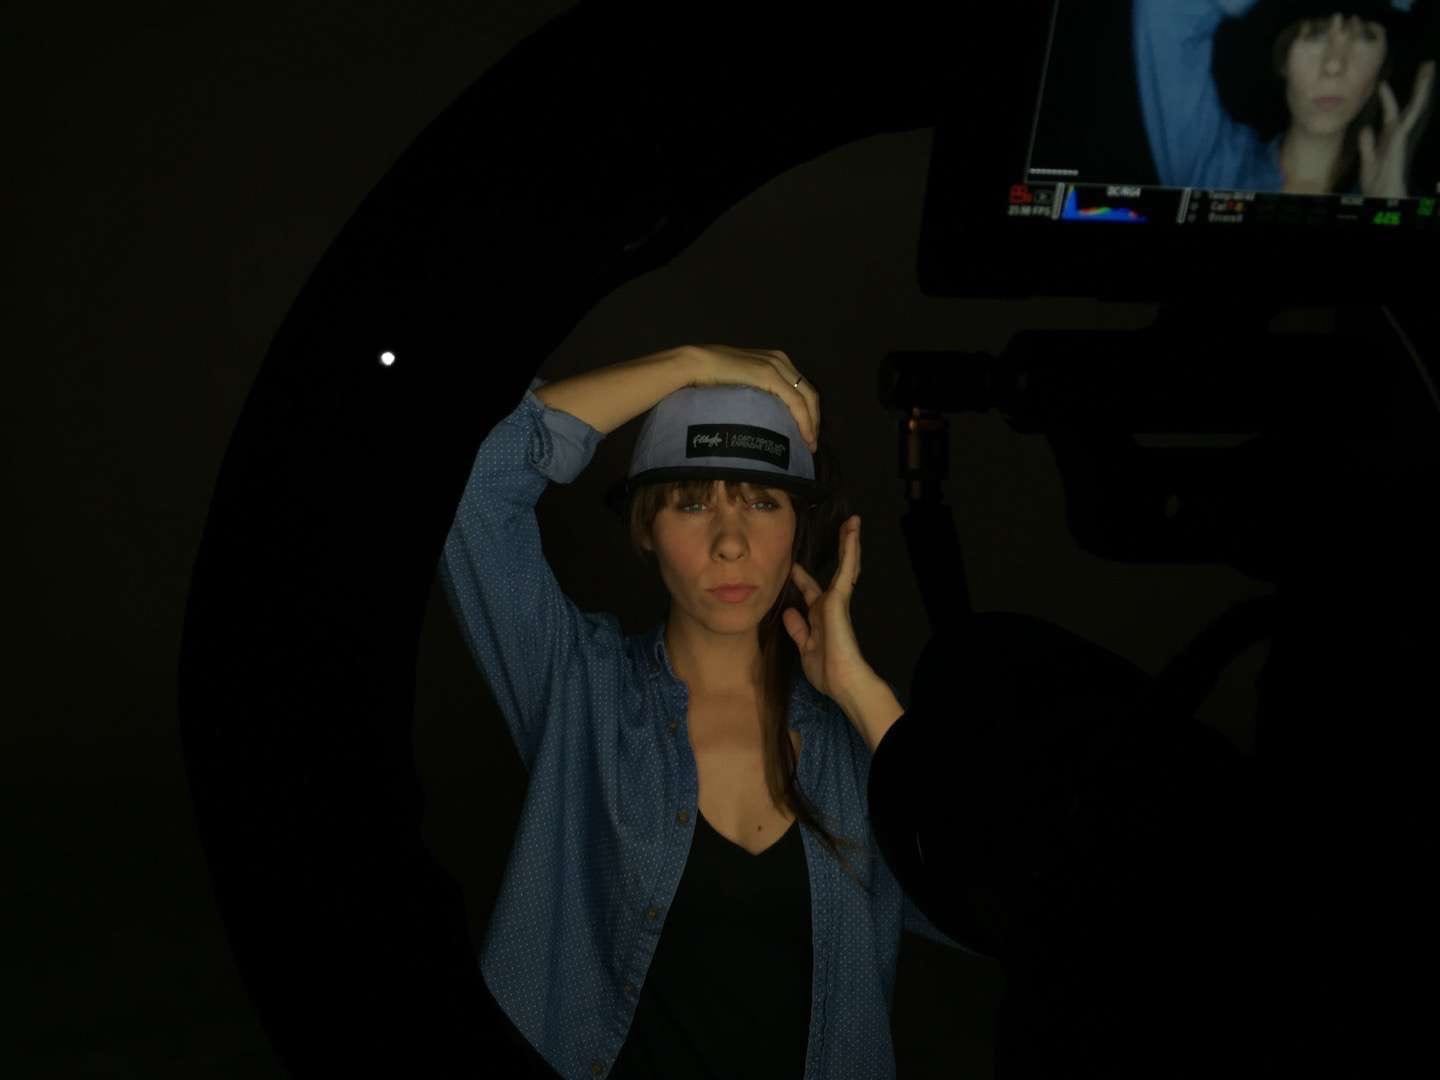 IU C&I Studio Portfolio Filibuster Apparel Woman with long brown hair in a blue shirt wearing a gray hat with black rim with video display in foreground